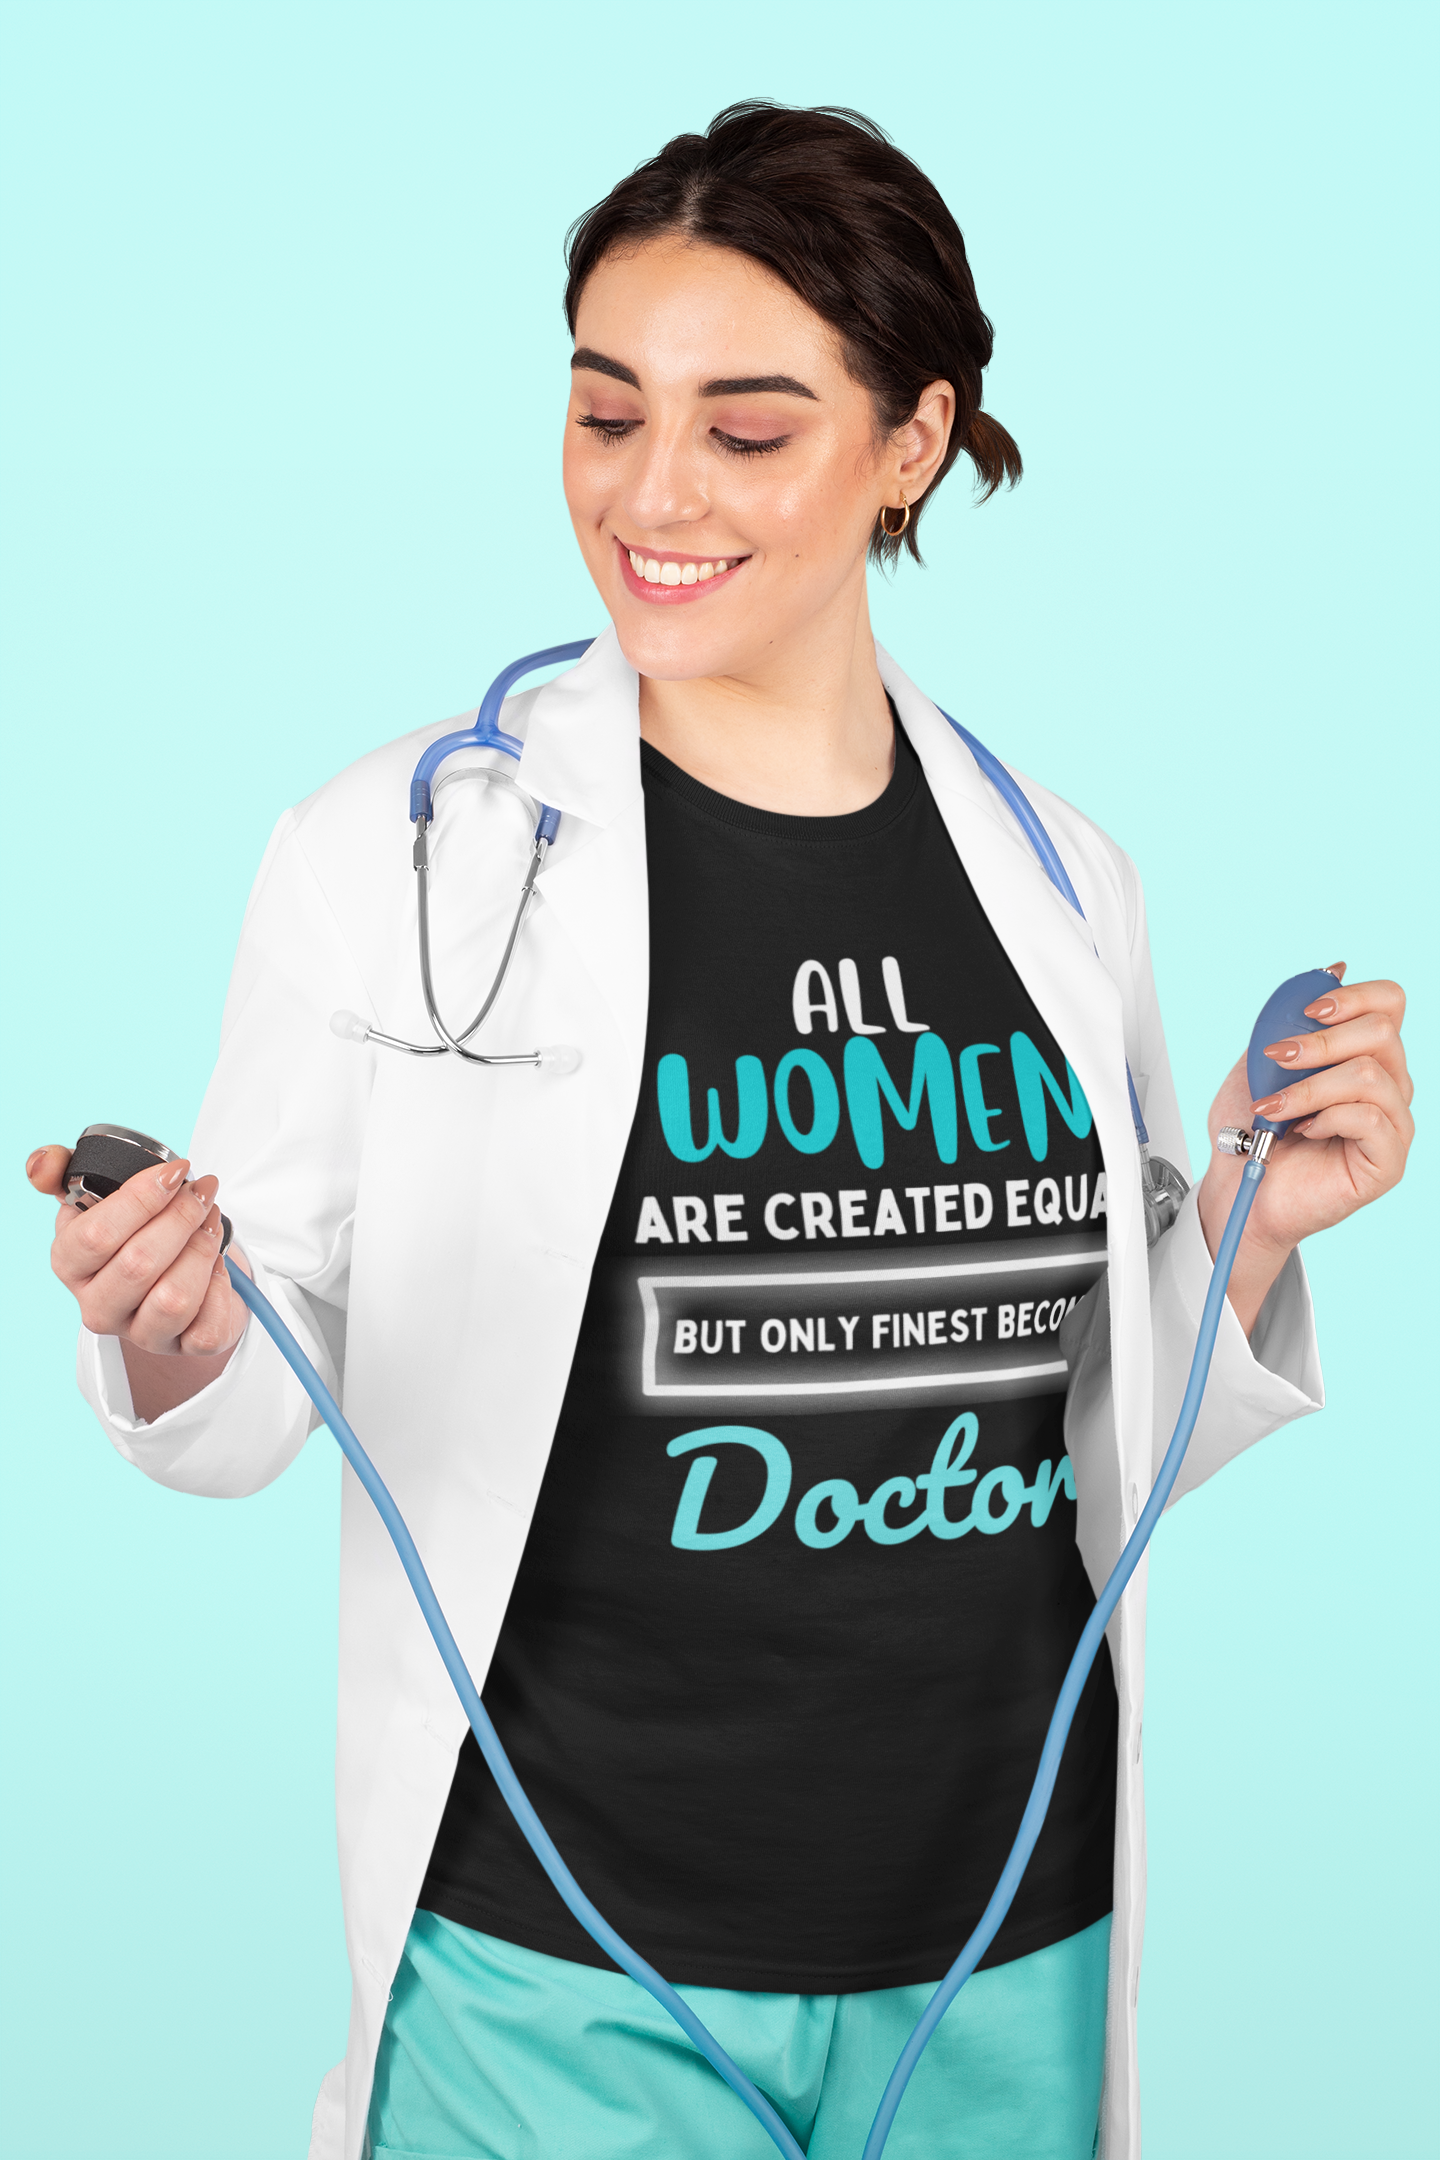 All Women are created equal but only finest become Doctor Softstyle Tee